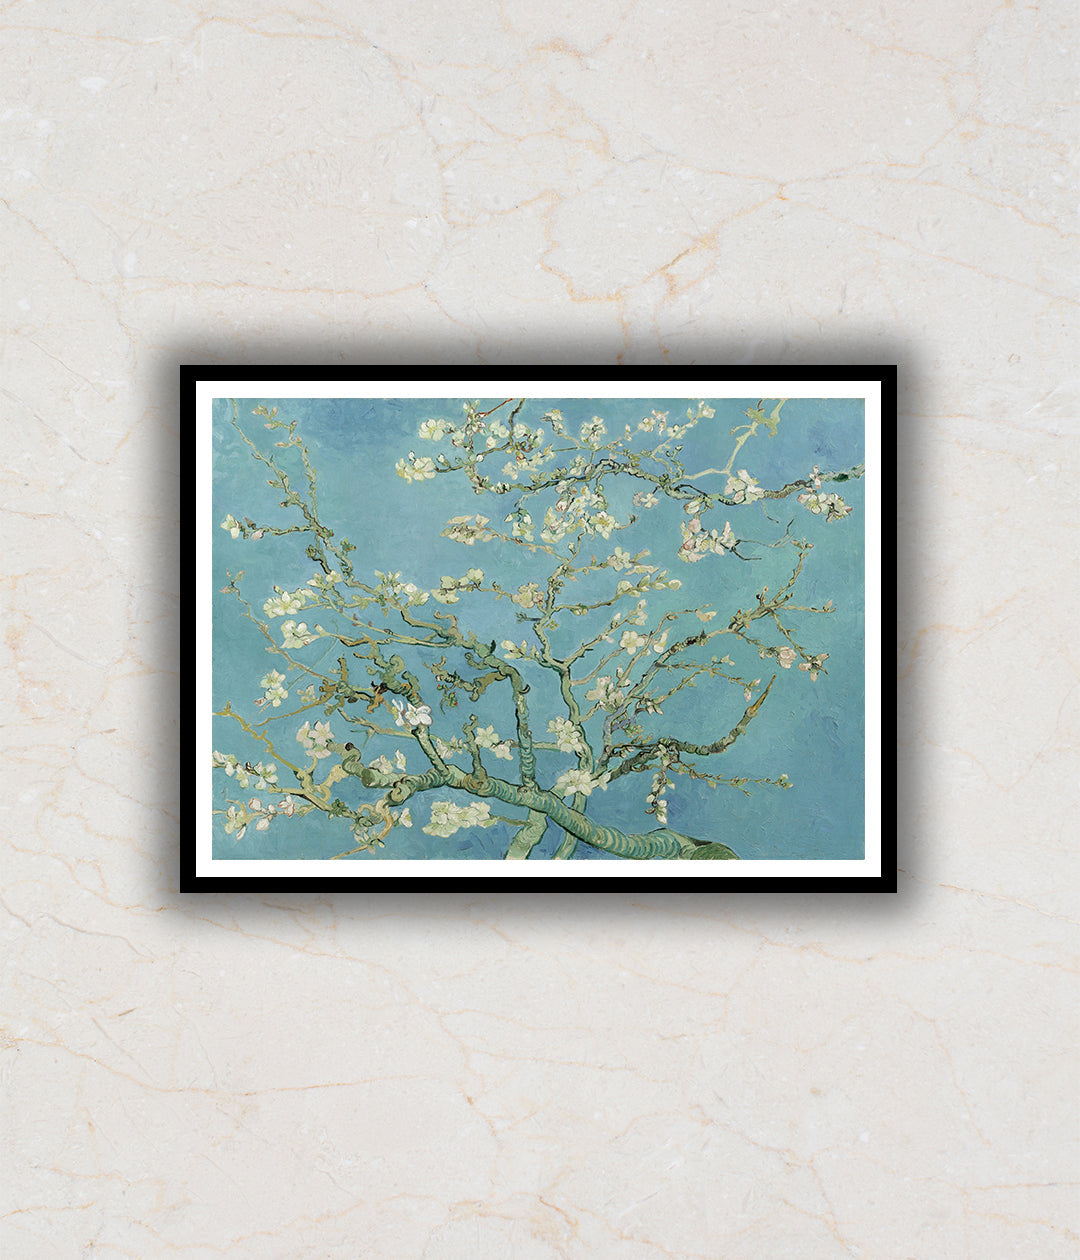 Almond Blossom Artwork Painting For Home Wall Art D�_cor By Vincent Van Gogh